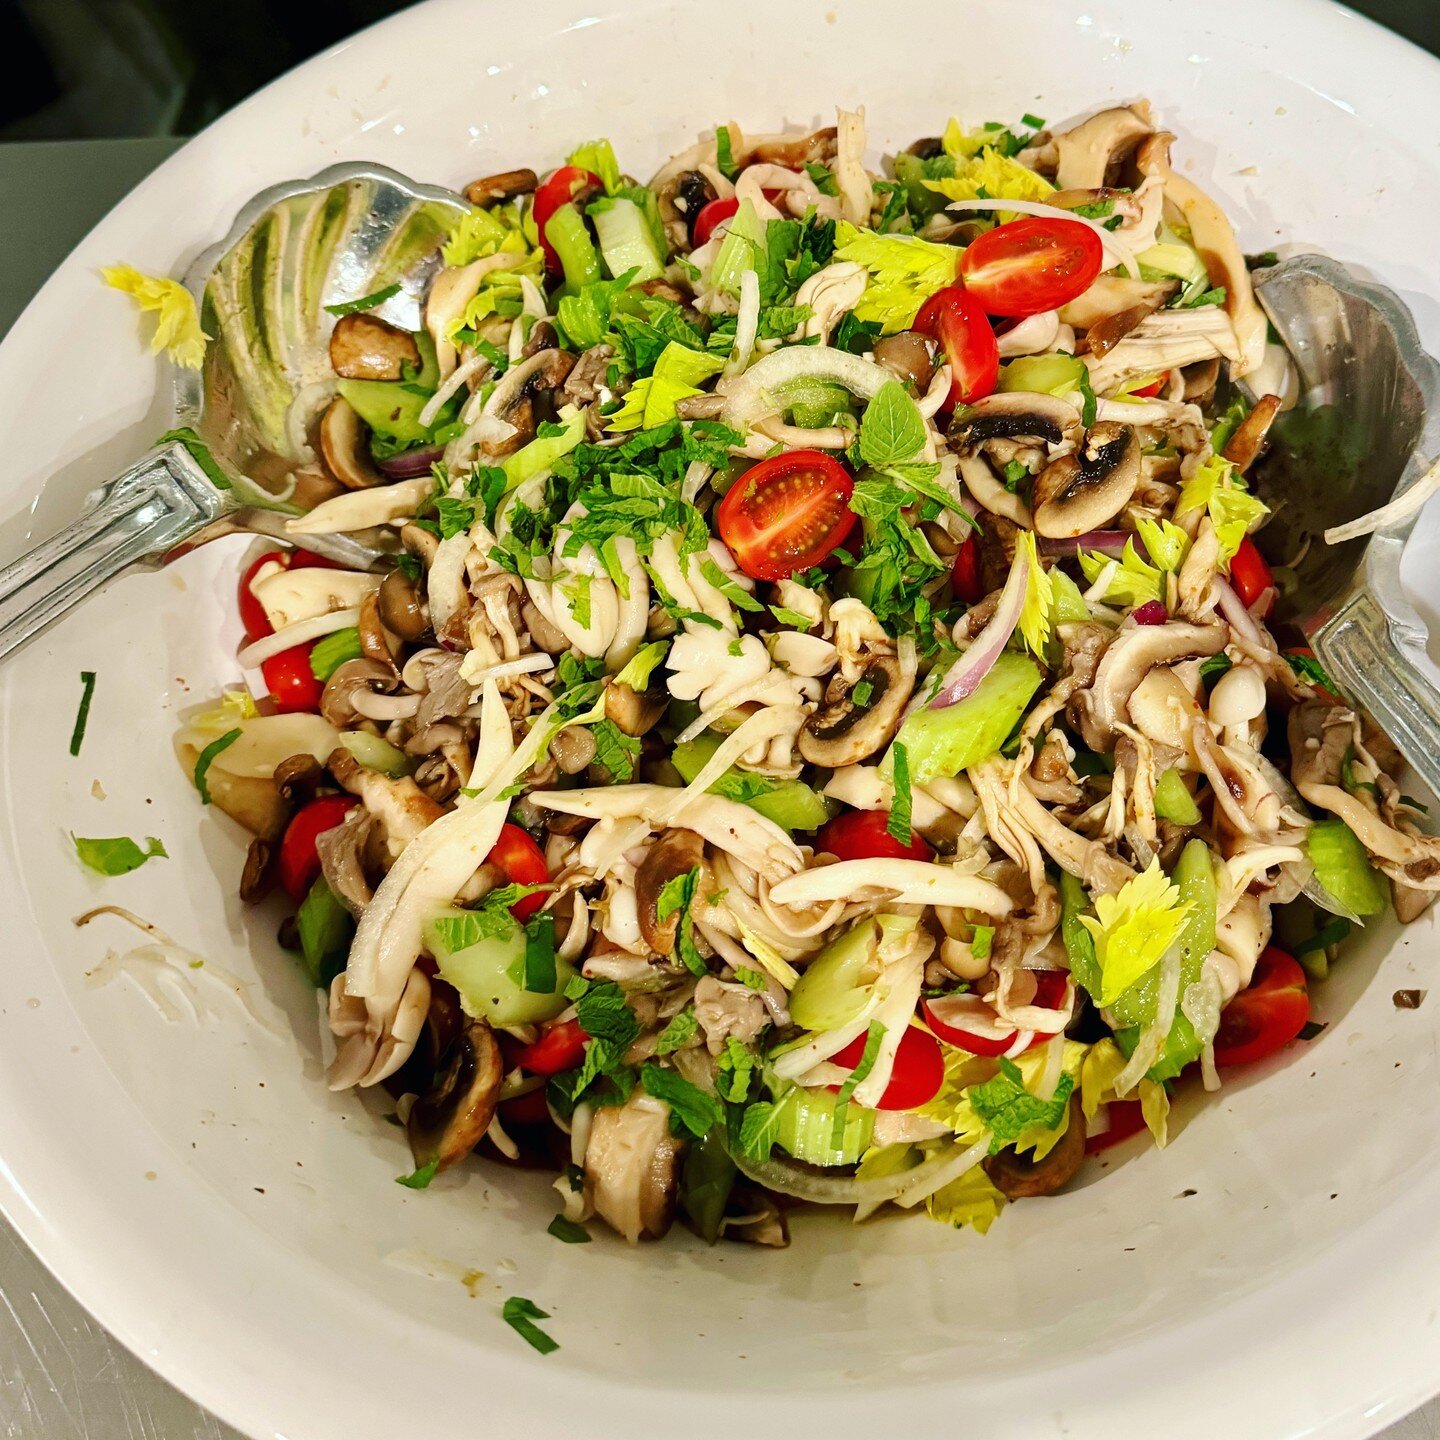 Taught a Thai class this week for a lovely group from Park City Style magazine. Love this Thai Mushroom Salad with yummy lime, cilantro and fish sauce dressing. I love mushroom and use ali the varieties I can find. The mushrooms for this salad are bl